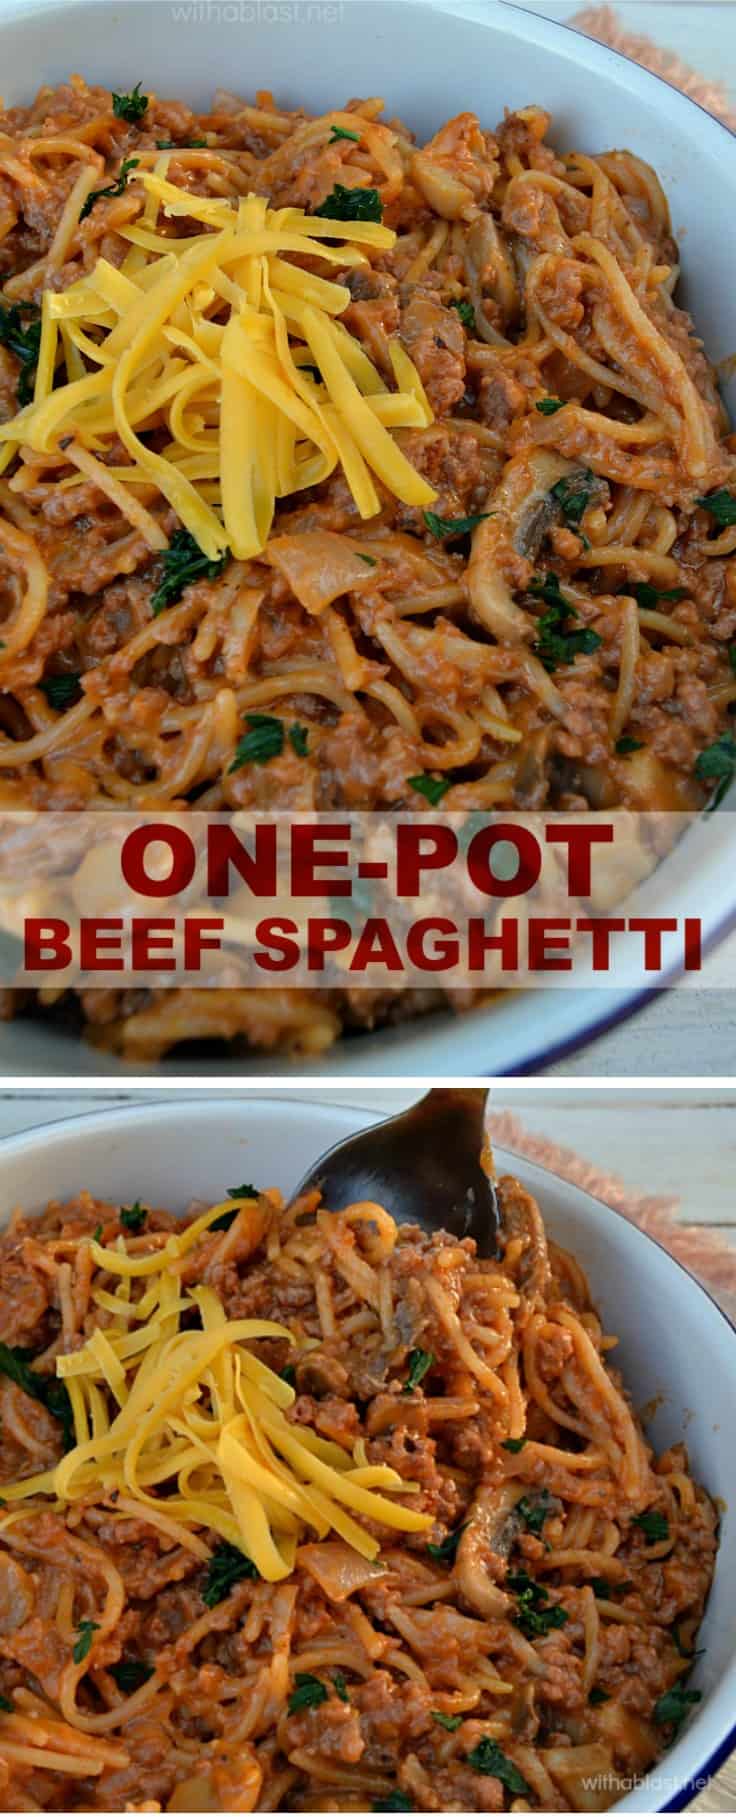 One-Pot Beef Spaghetti is ready in under 25 minutes - a creamy tomato dinner dish with ground beef, vegetables and perfectly spiced ! #OnePotDinner #SpaghettiDinner #GroundBeefRecipes #ComfortFood